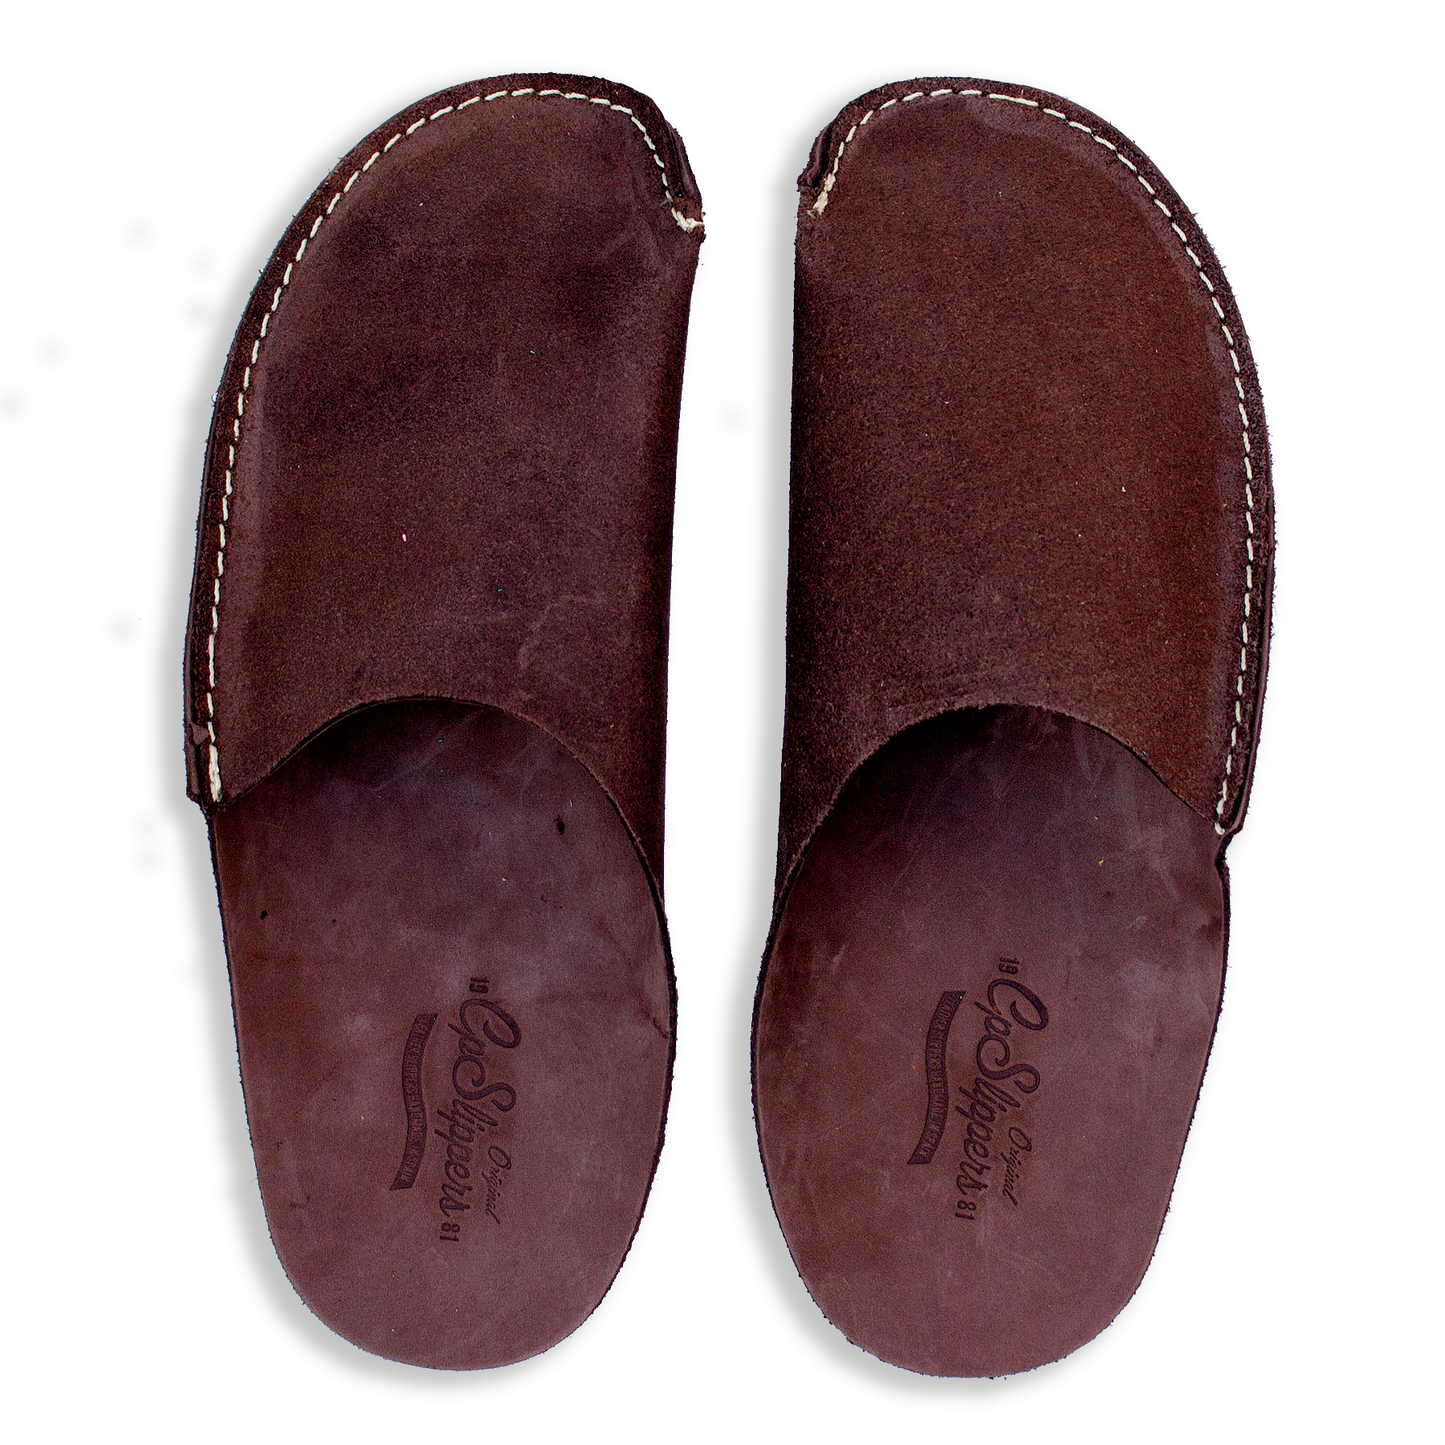 Brown Slippers for and Women by CP Slippers Minimalist